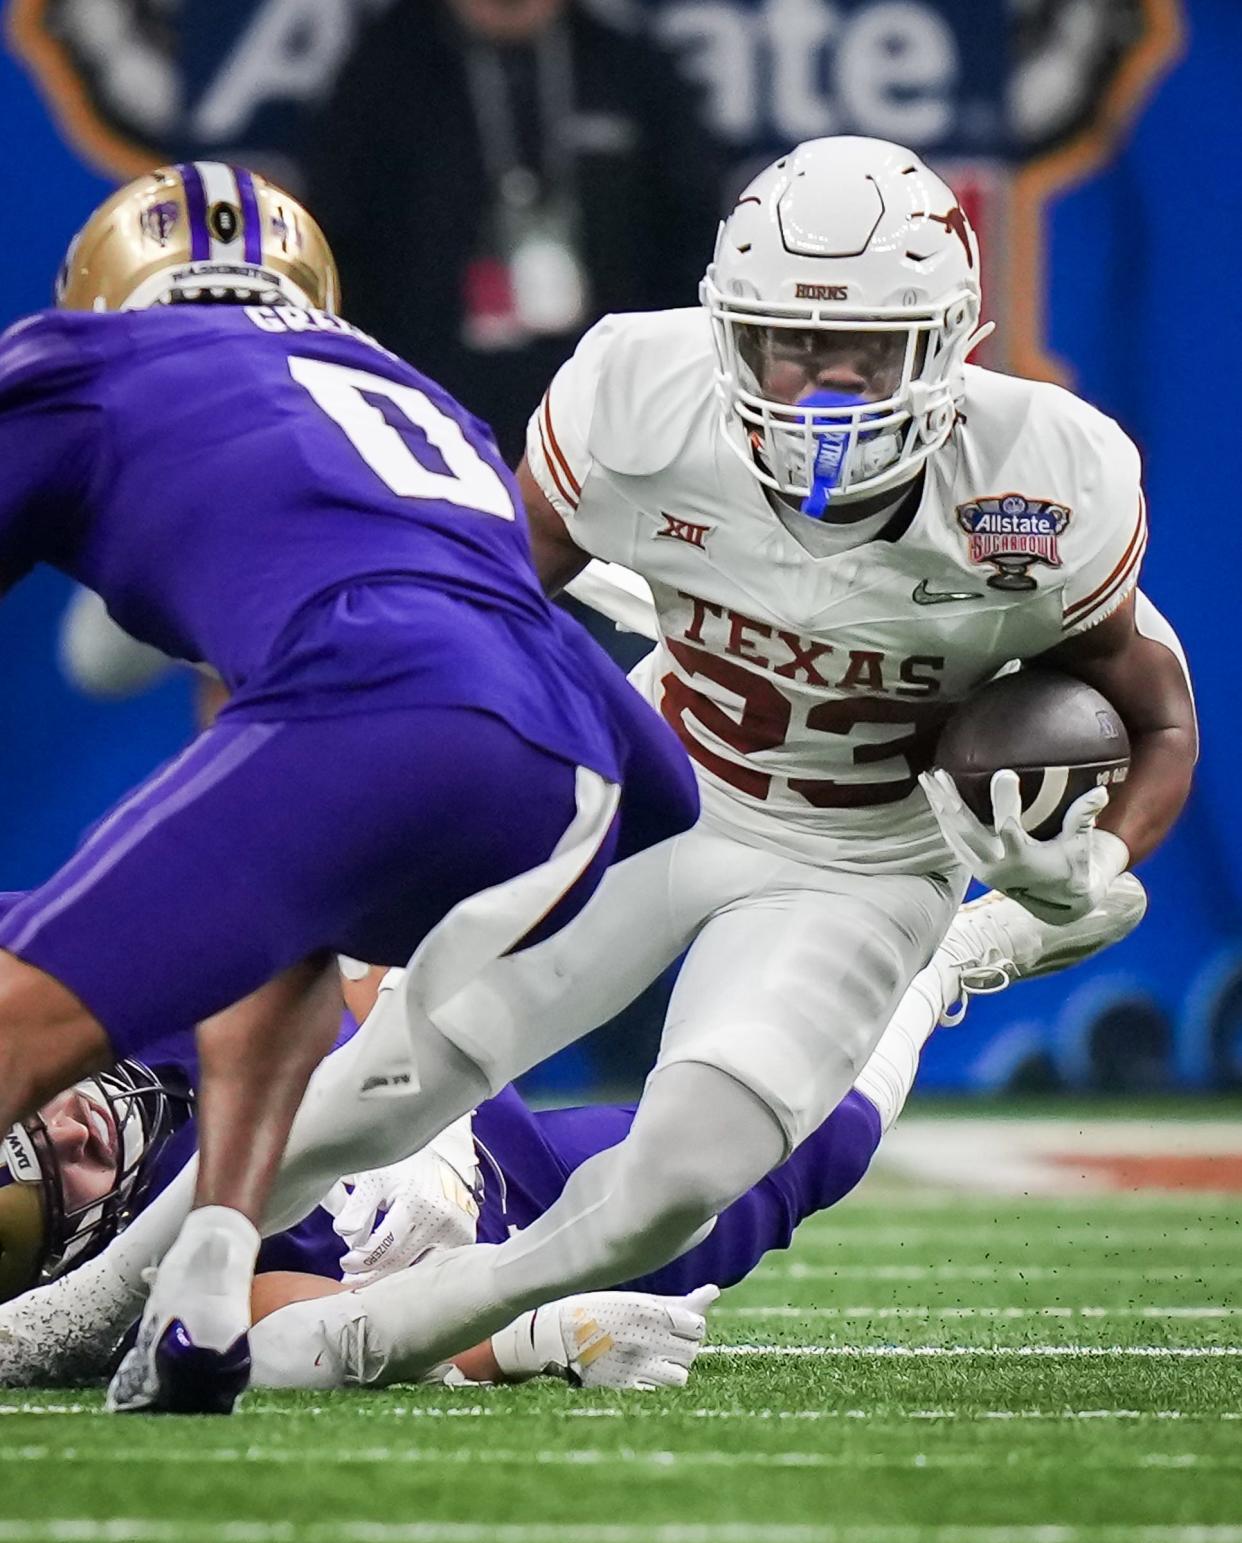 Texas running back Jaydon Blue  carries the ball against Washington in last season's College Football Playoff semifinal. What role will Blue have this season while sharing carries with CJ Baxter? Saturday's spring game will provide some clues.